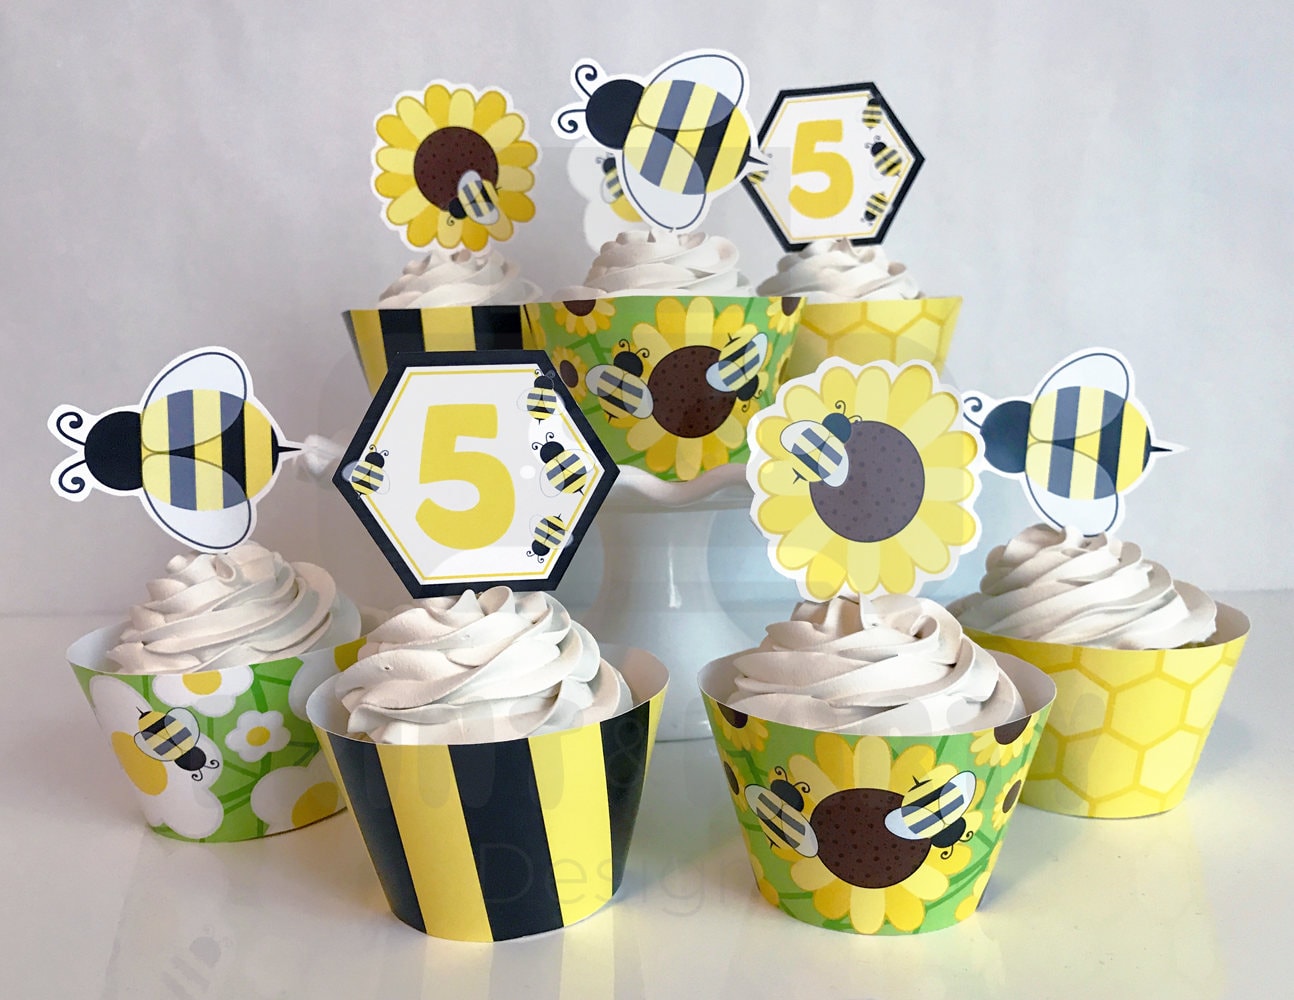 Printable Bumble Bee Cupcake Toppers and Wrappers, Bumble Bee Birthday  Party, Bumble Bee Cupcakes, Edit Yourself, Instant Download 